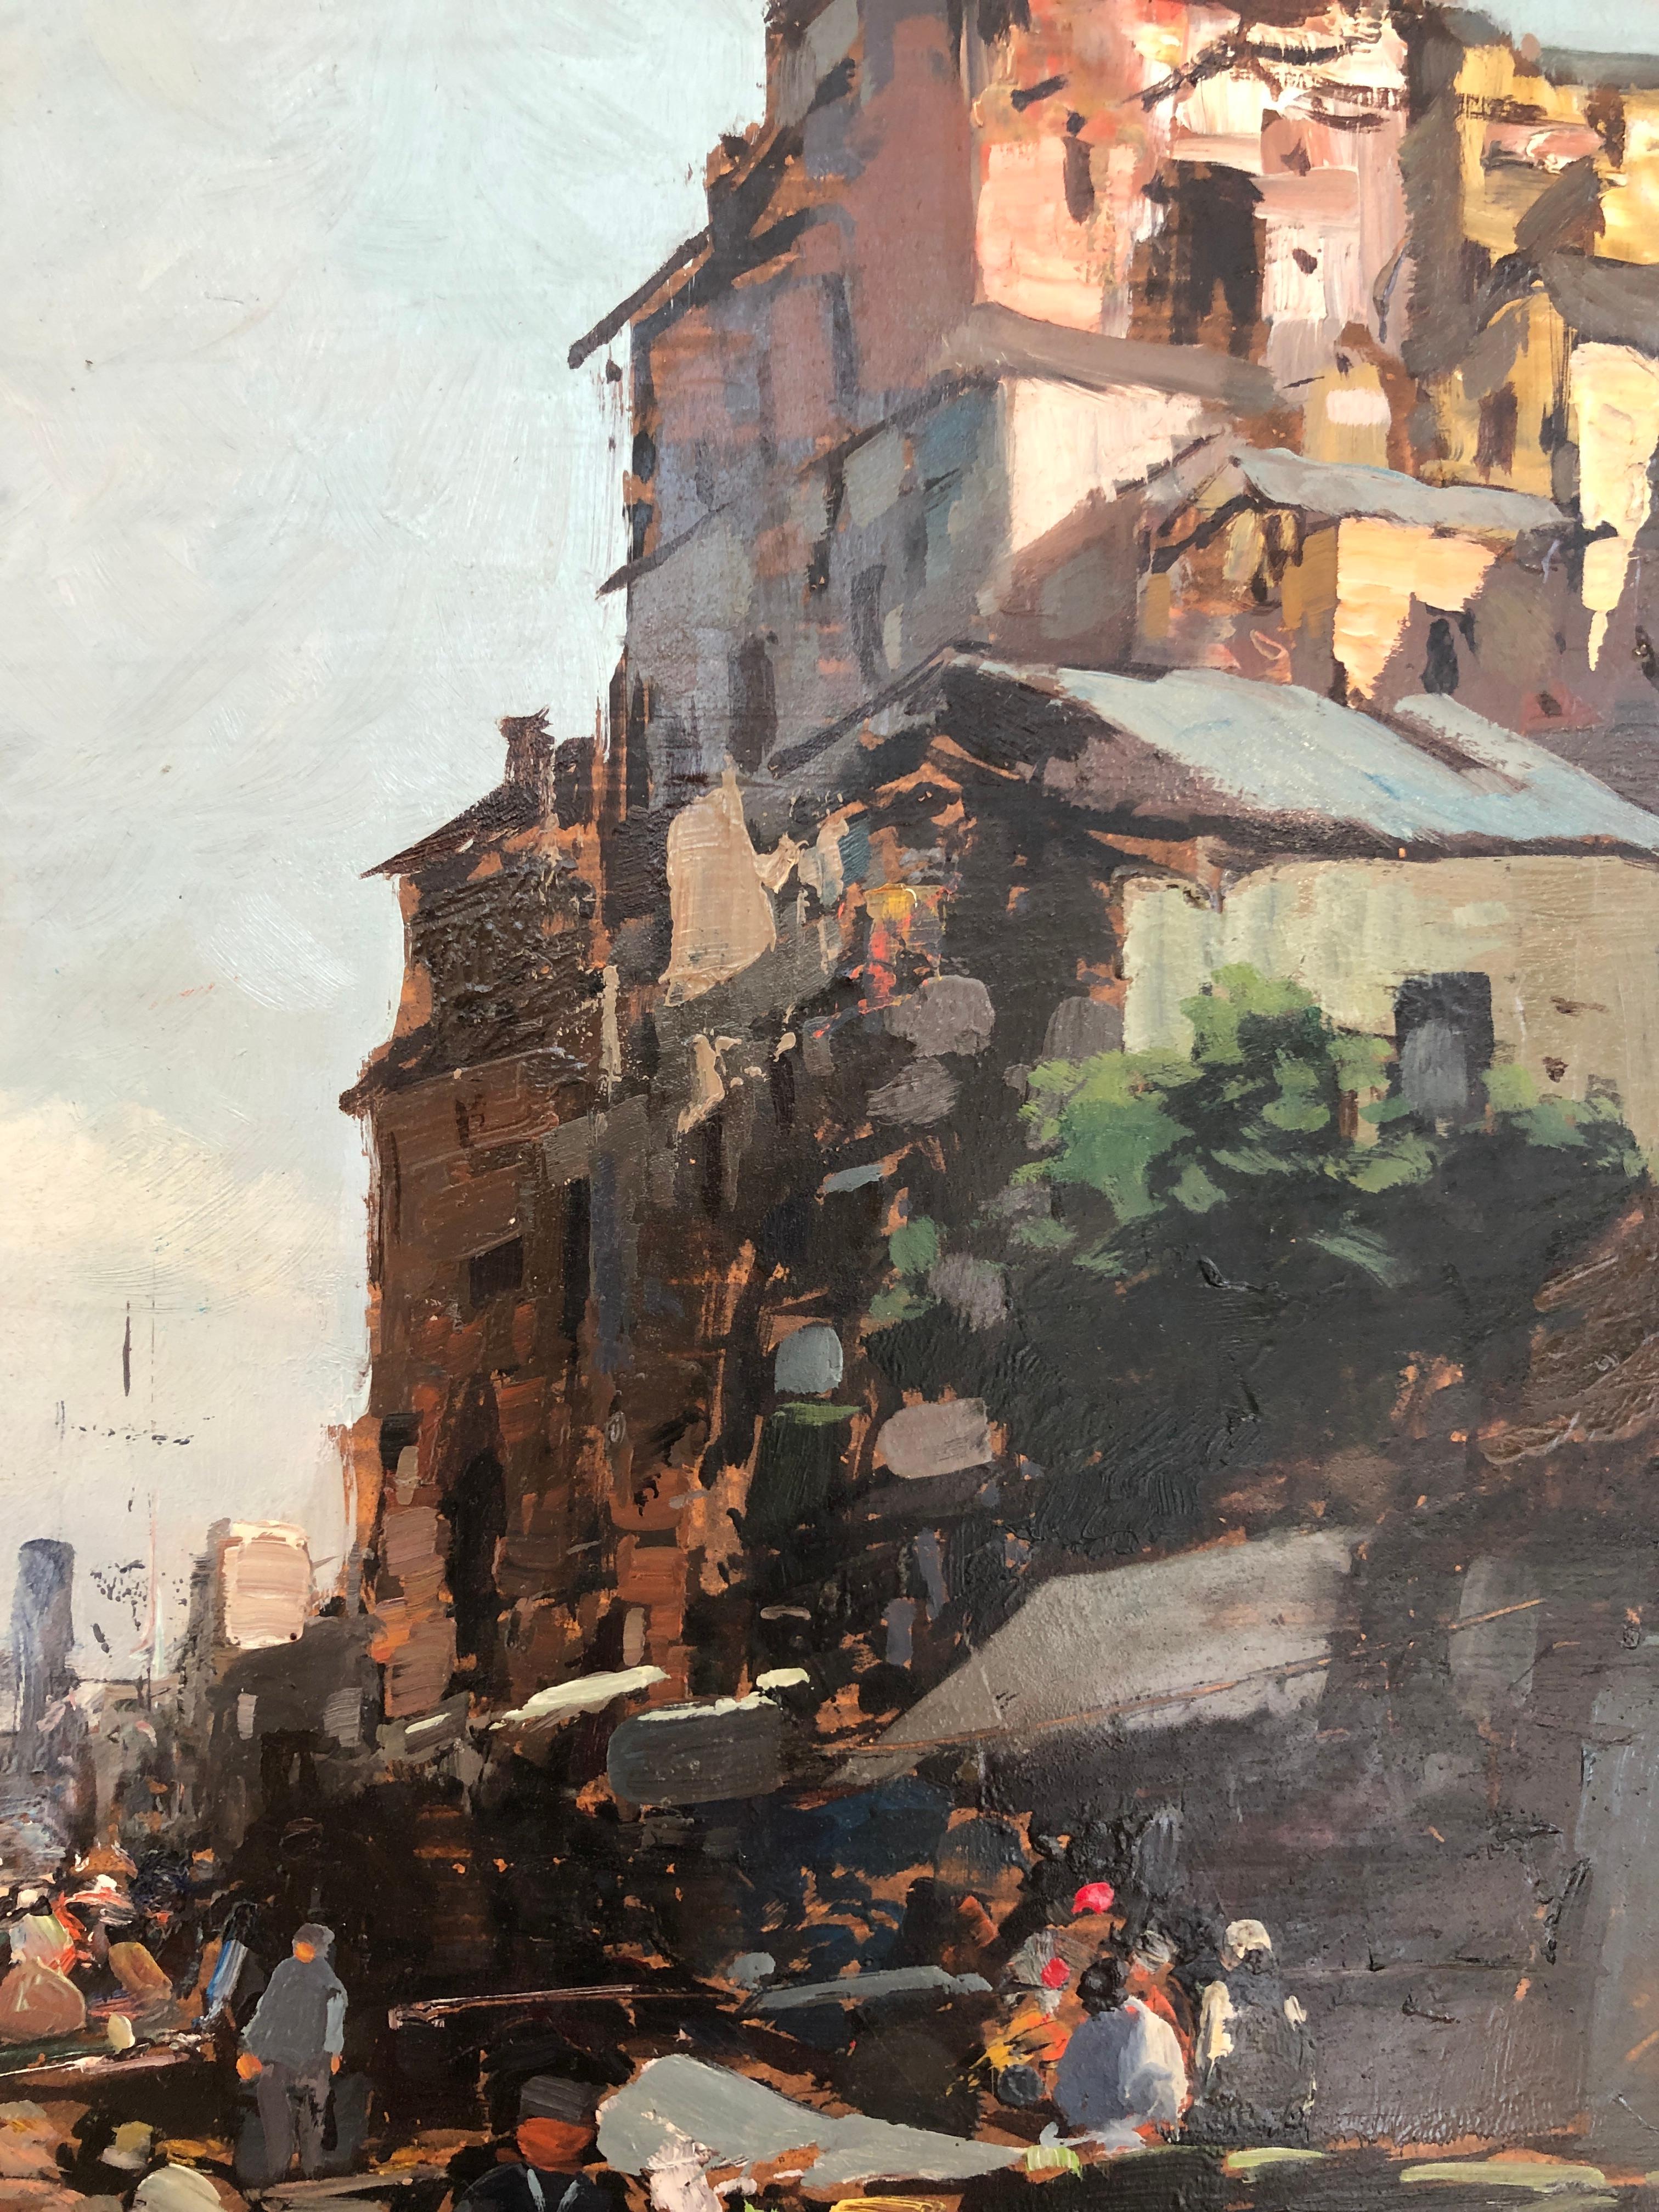 Busy fishing port, Italy - Gray Landscape Painting by Ezelino Briante